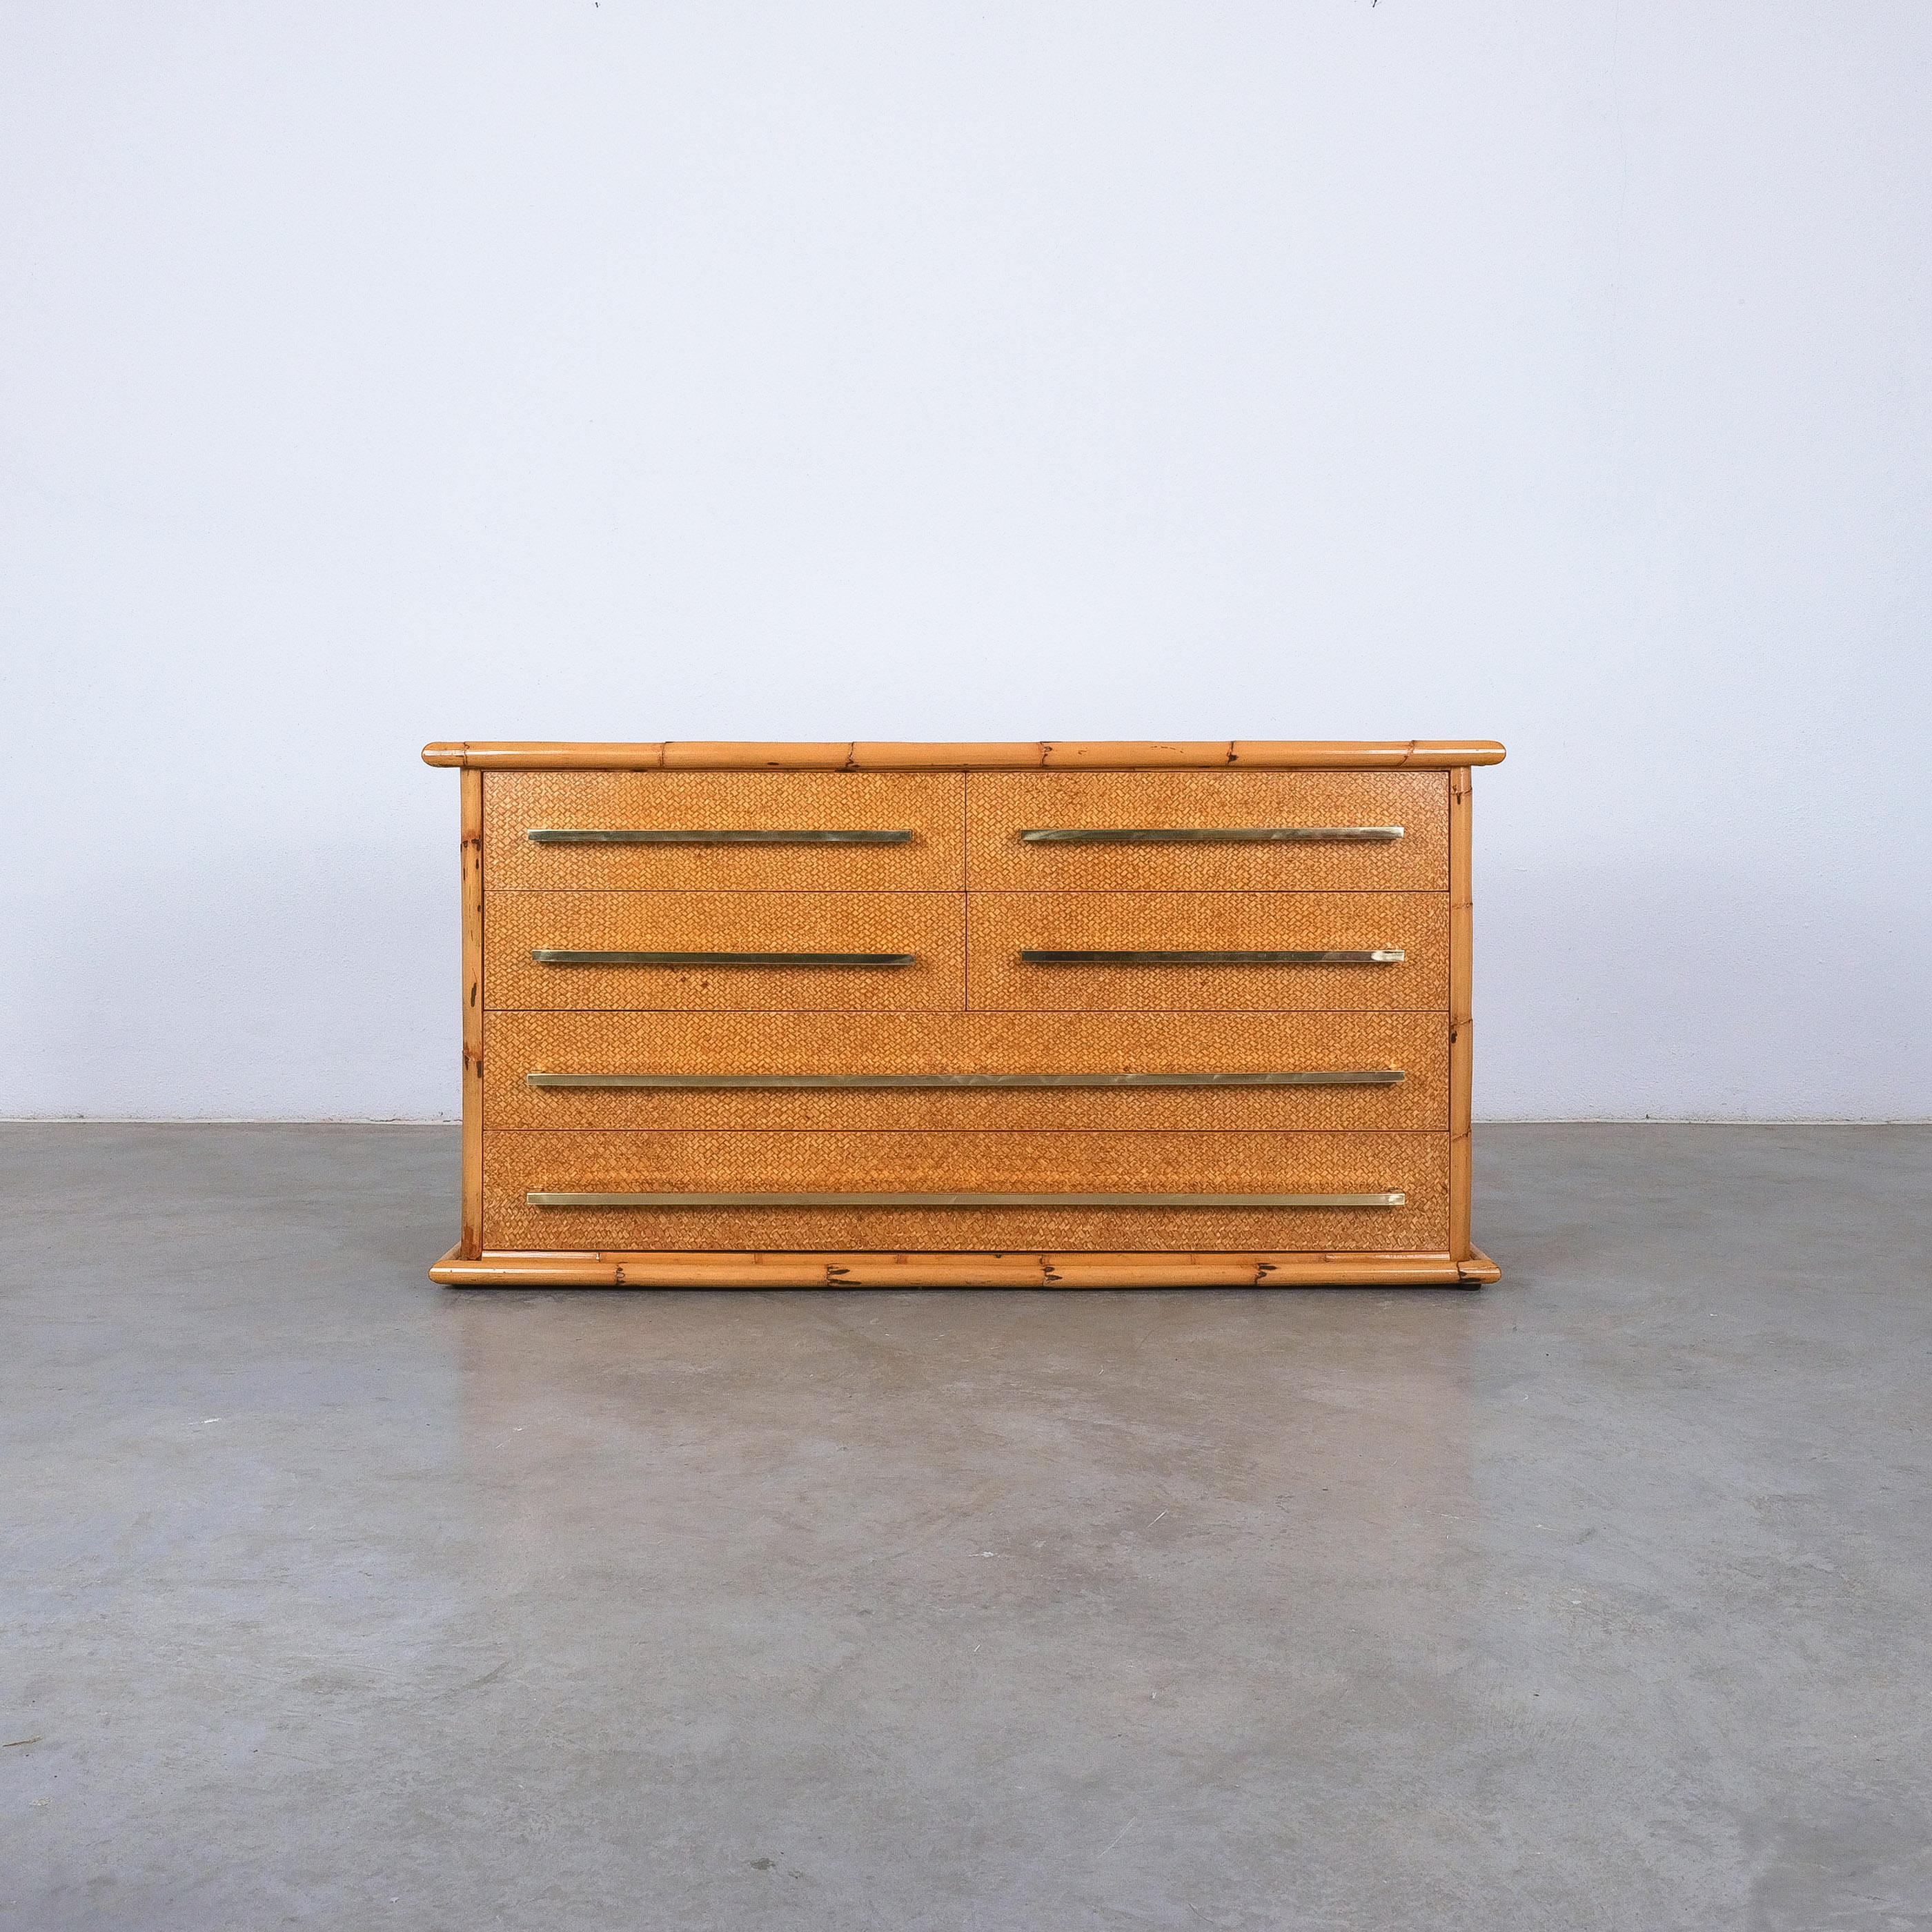 Bamboo Cane and Brass Commode Chest of Drawers by Vivai del Sud, Italy, 1975 - Dimensions are 51